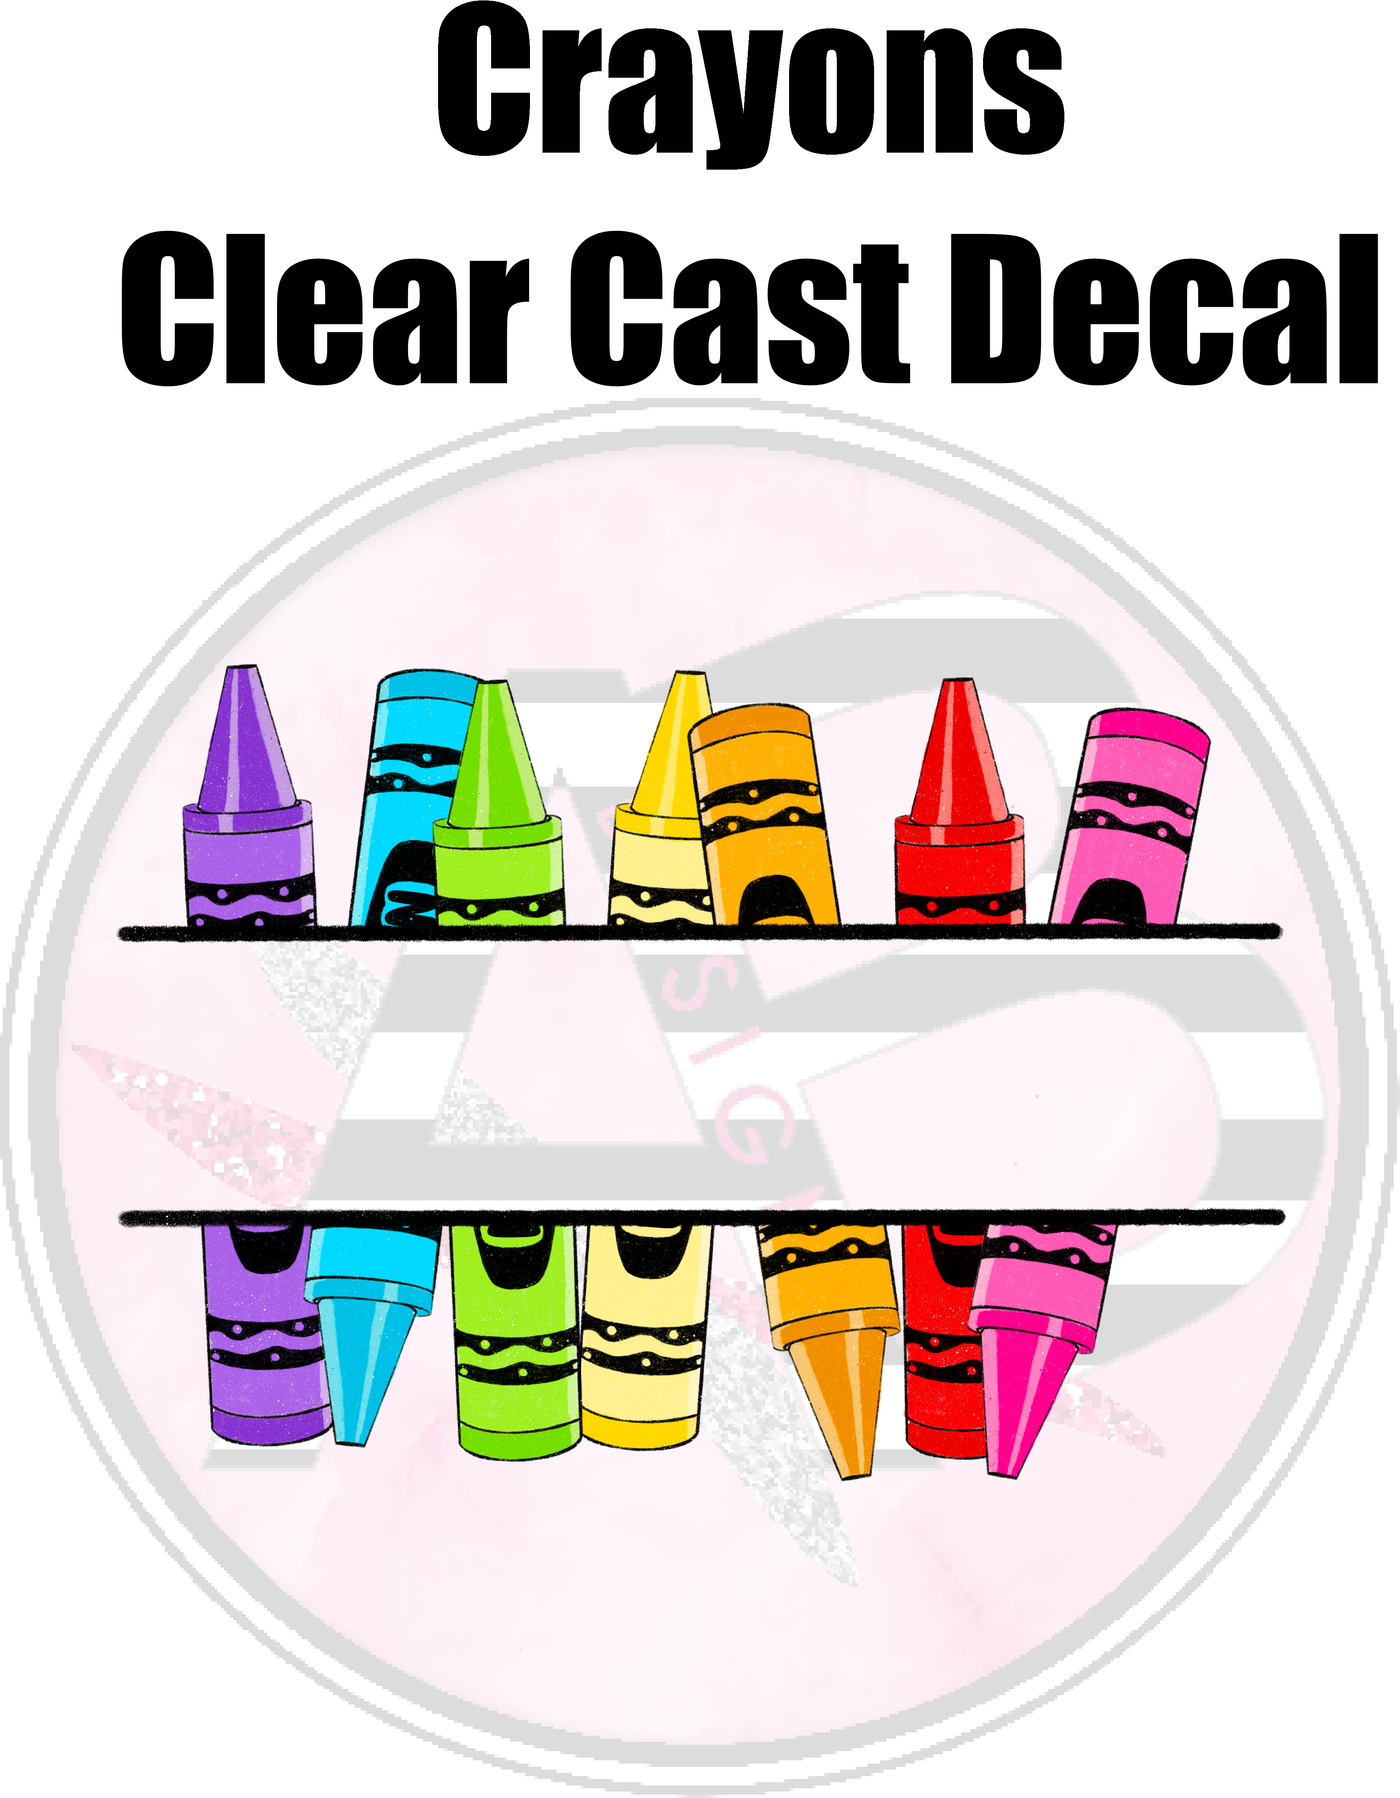 Crayons 1 - Clear Cast Decal